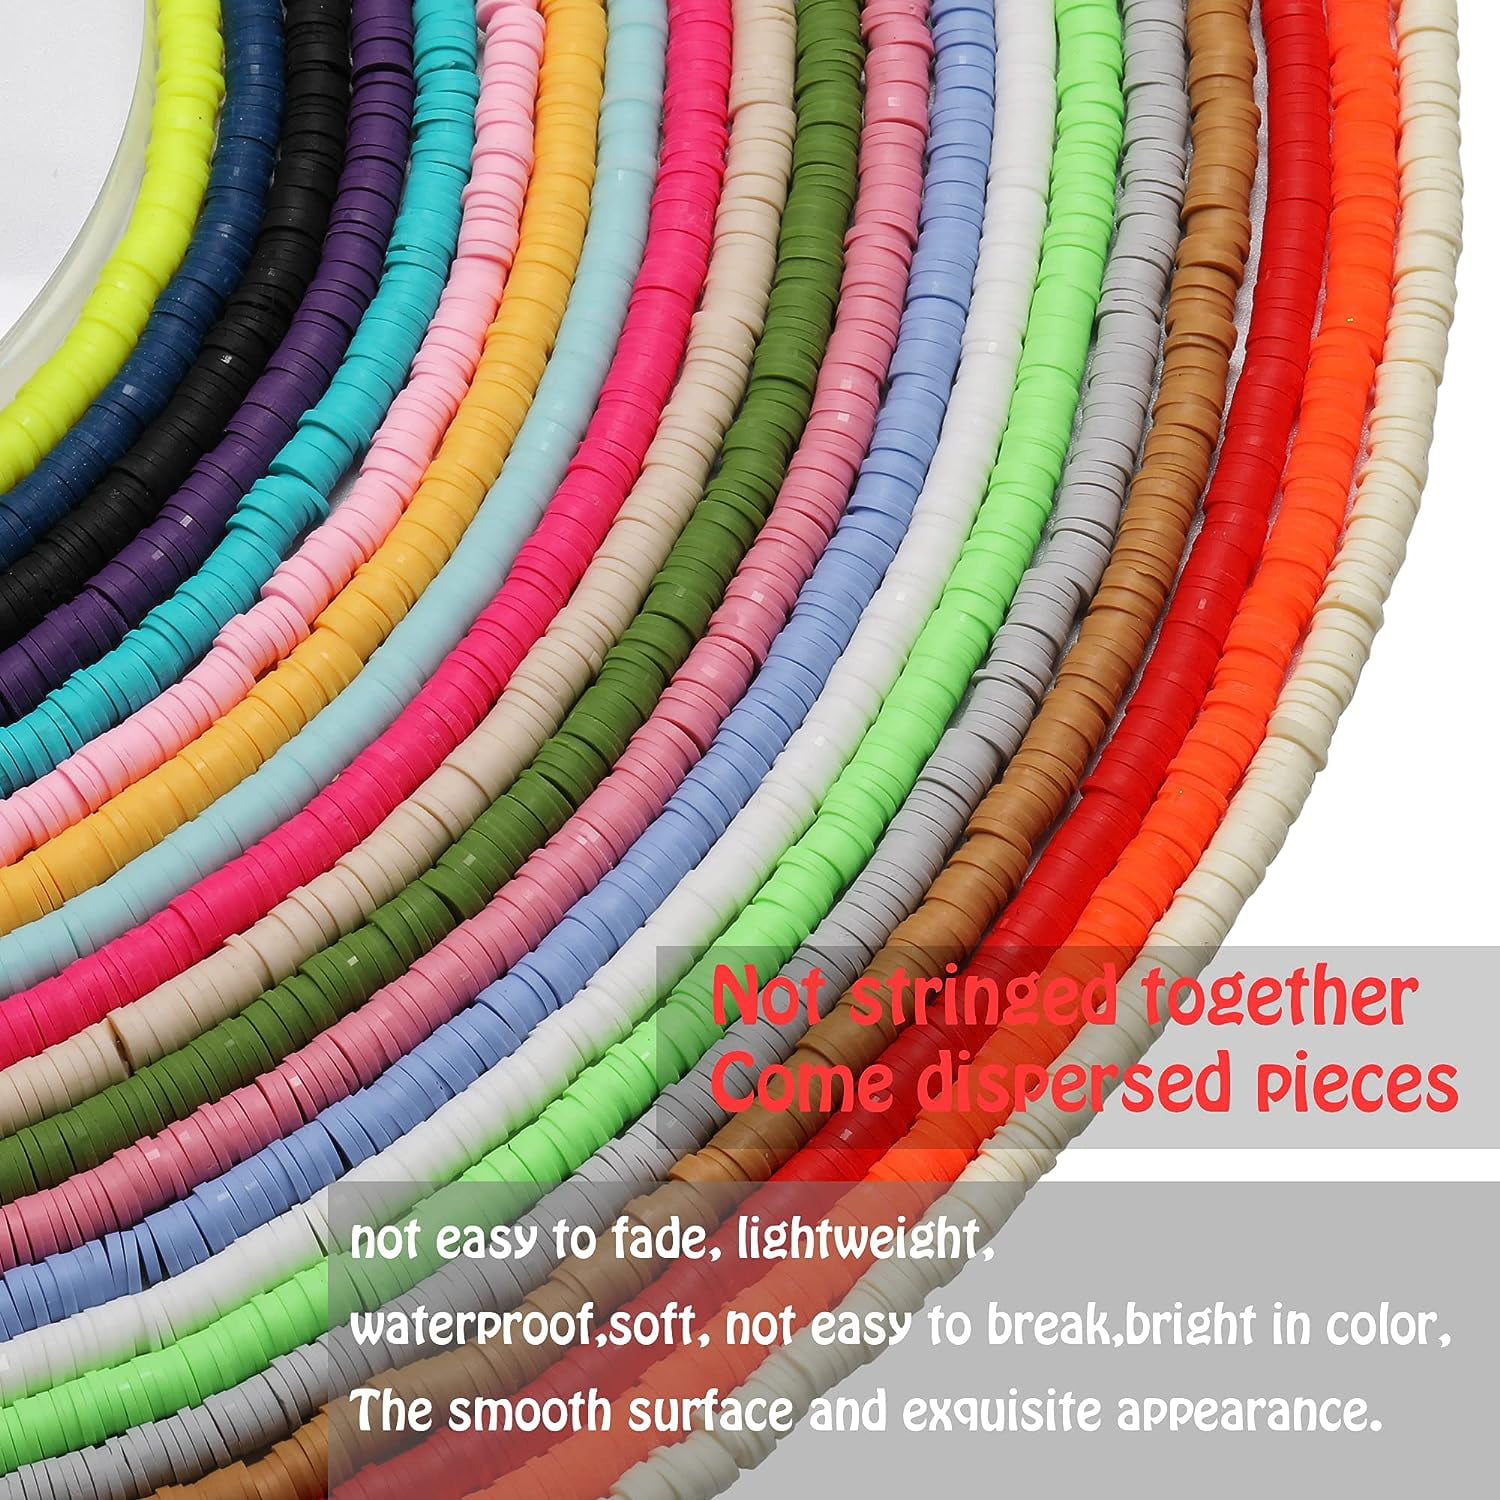 Paodey 12000 Pcs Clay Beads for Bracelet Making, 48 Colors 3 Boxes, Jewelry  Making Kit Polymer Spacer Preppy Heishi Beads and Elastic Strings, Crafts